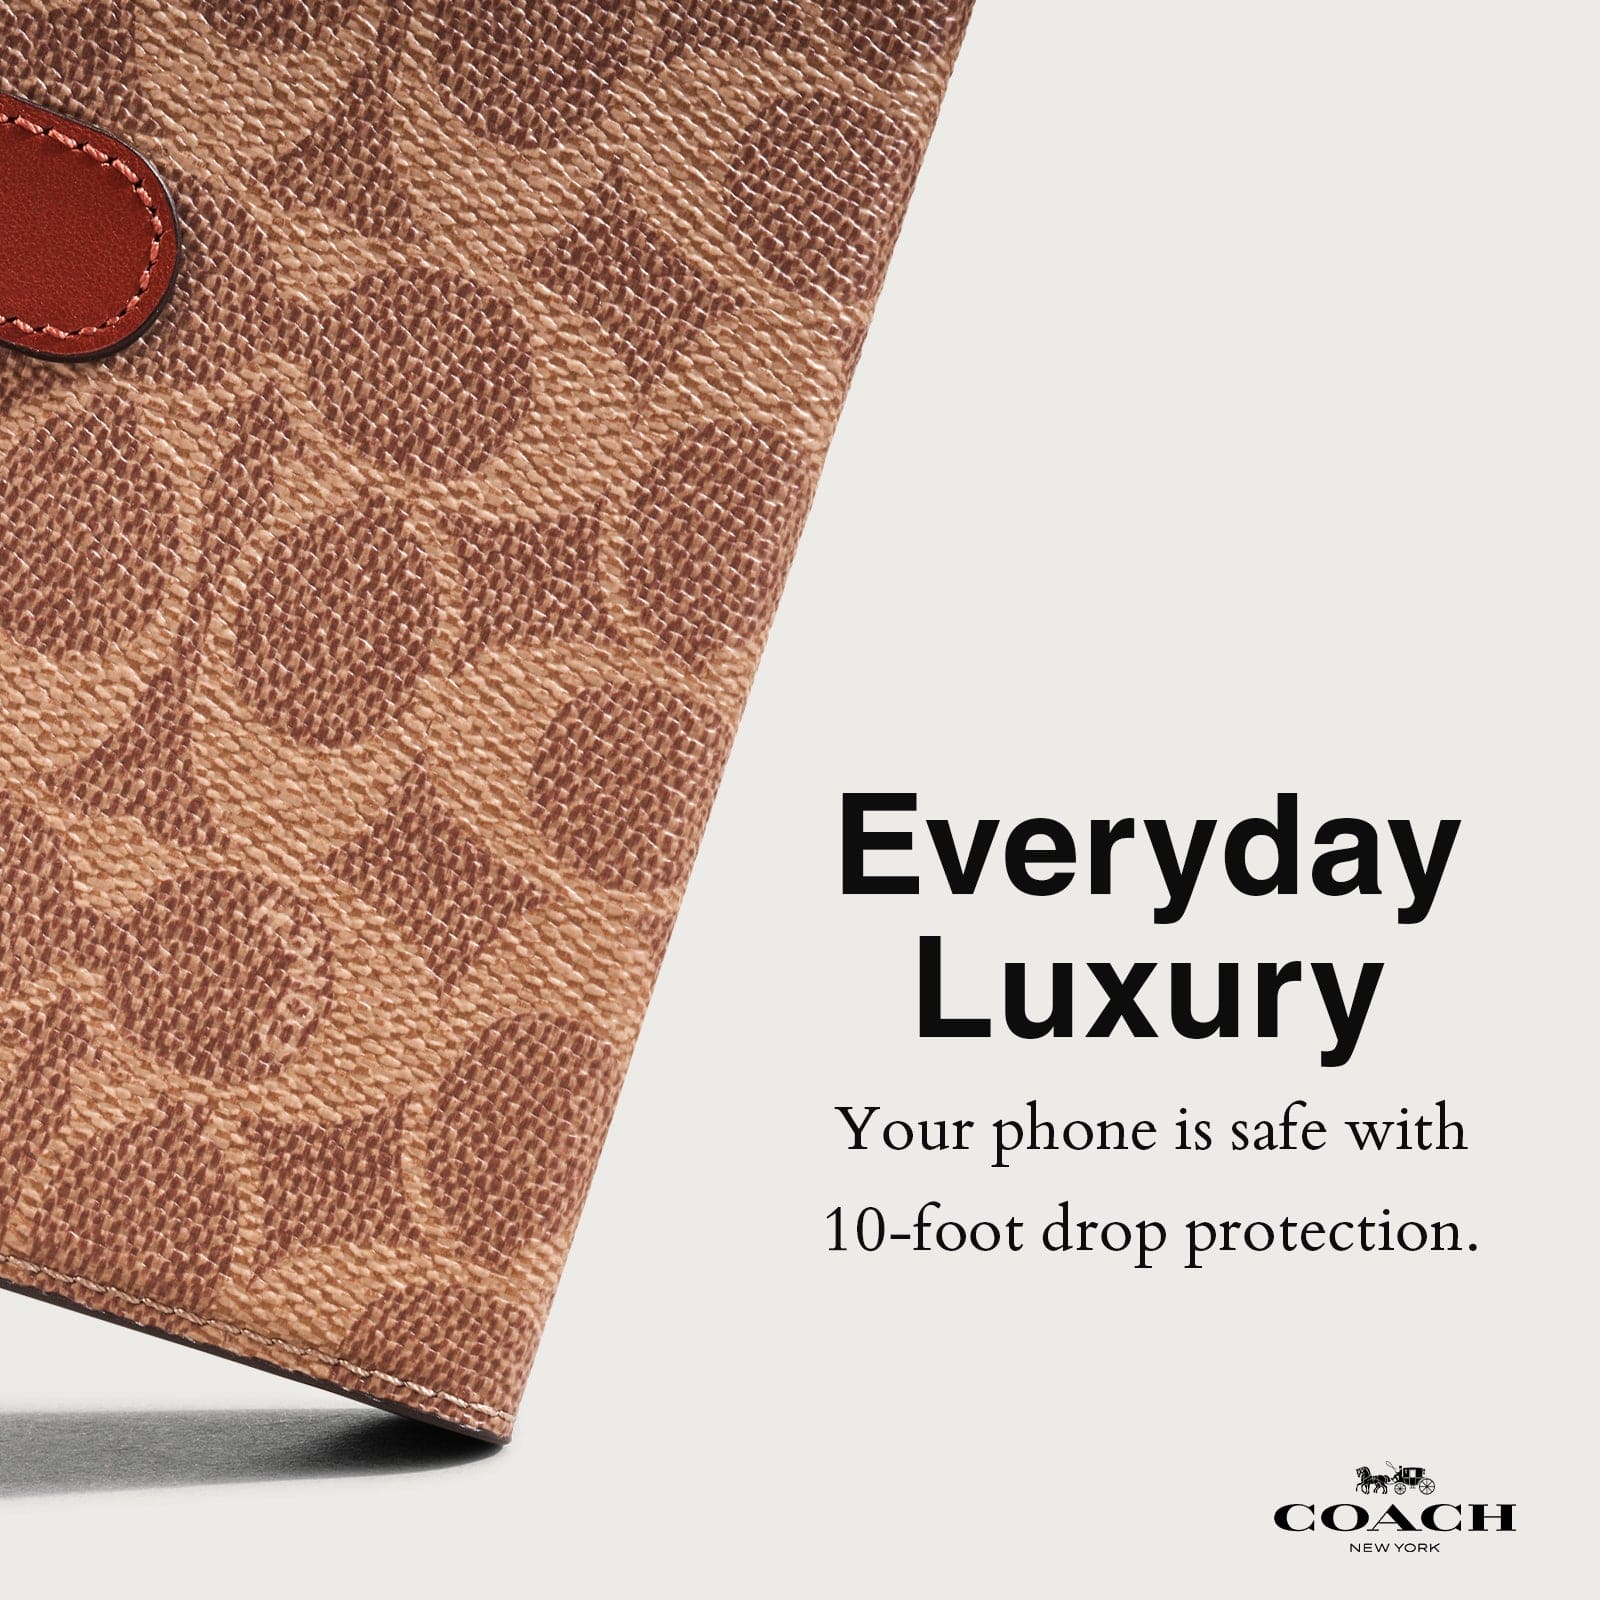 EVERYDAY LUXURY. YOUR PHONE IS SAFE WITH 10-FOOT DROP PROTECTION